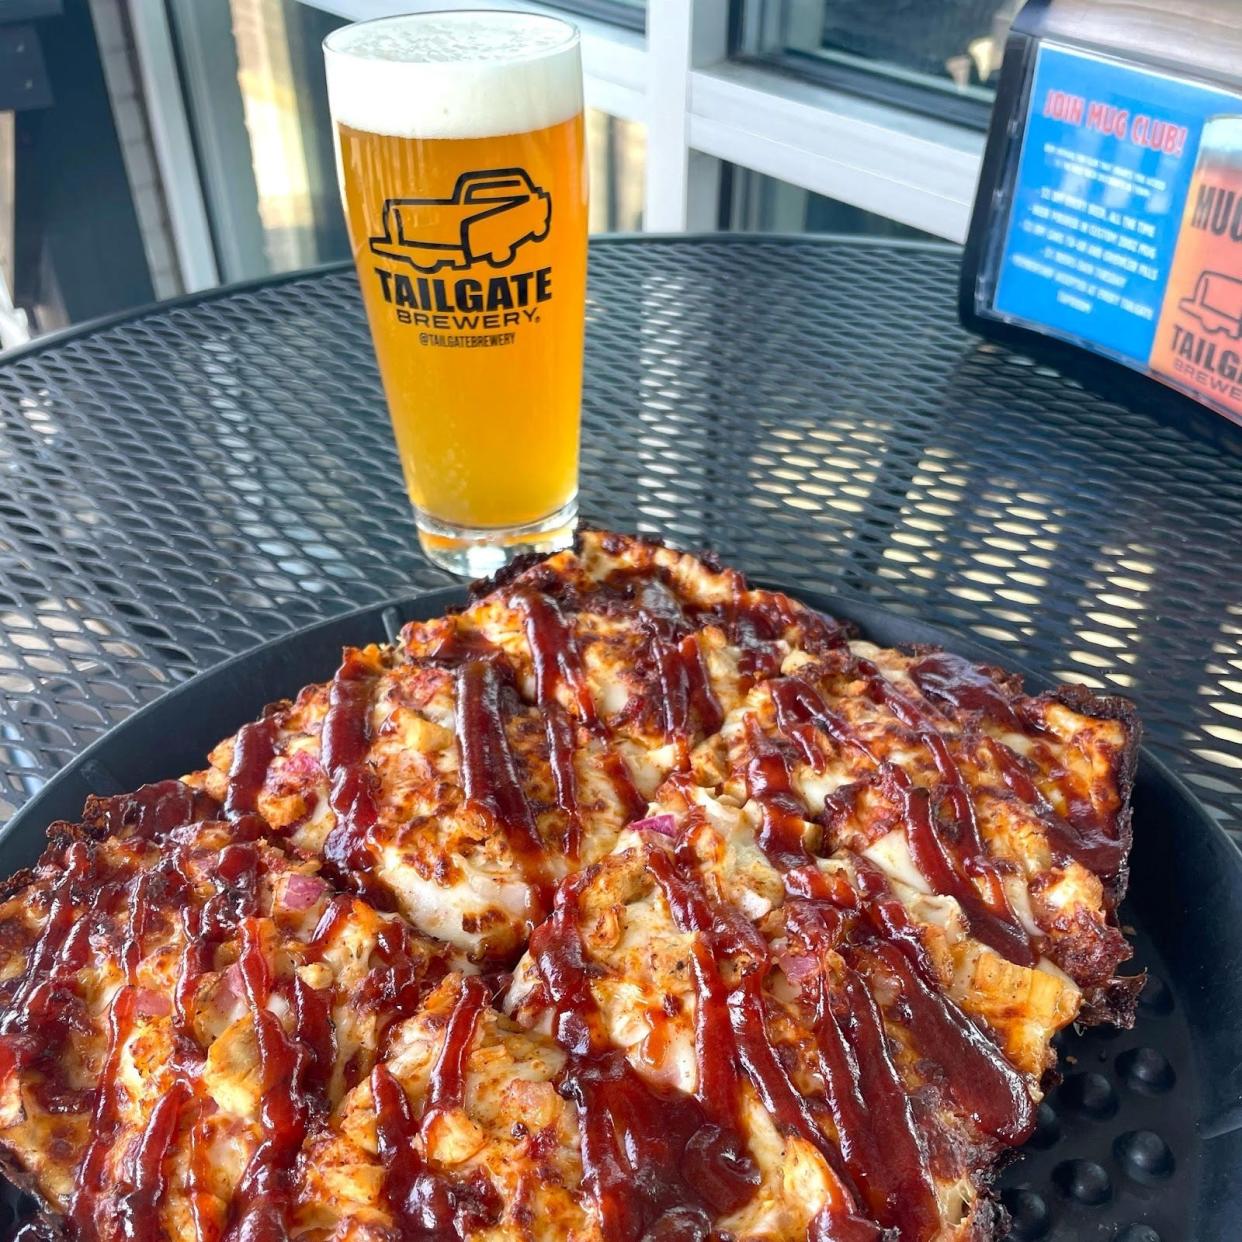 TailGate Brewery and pizzeria plan to open at the renovated former location of Coconut Bay Cafe at 210 Stones River Mall Blvd. off Old Fort Parkway (state Route 96) in Murfreesboro.